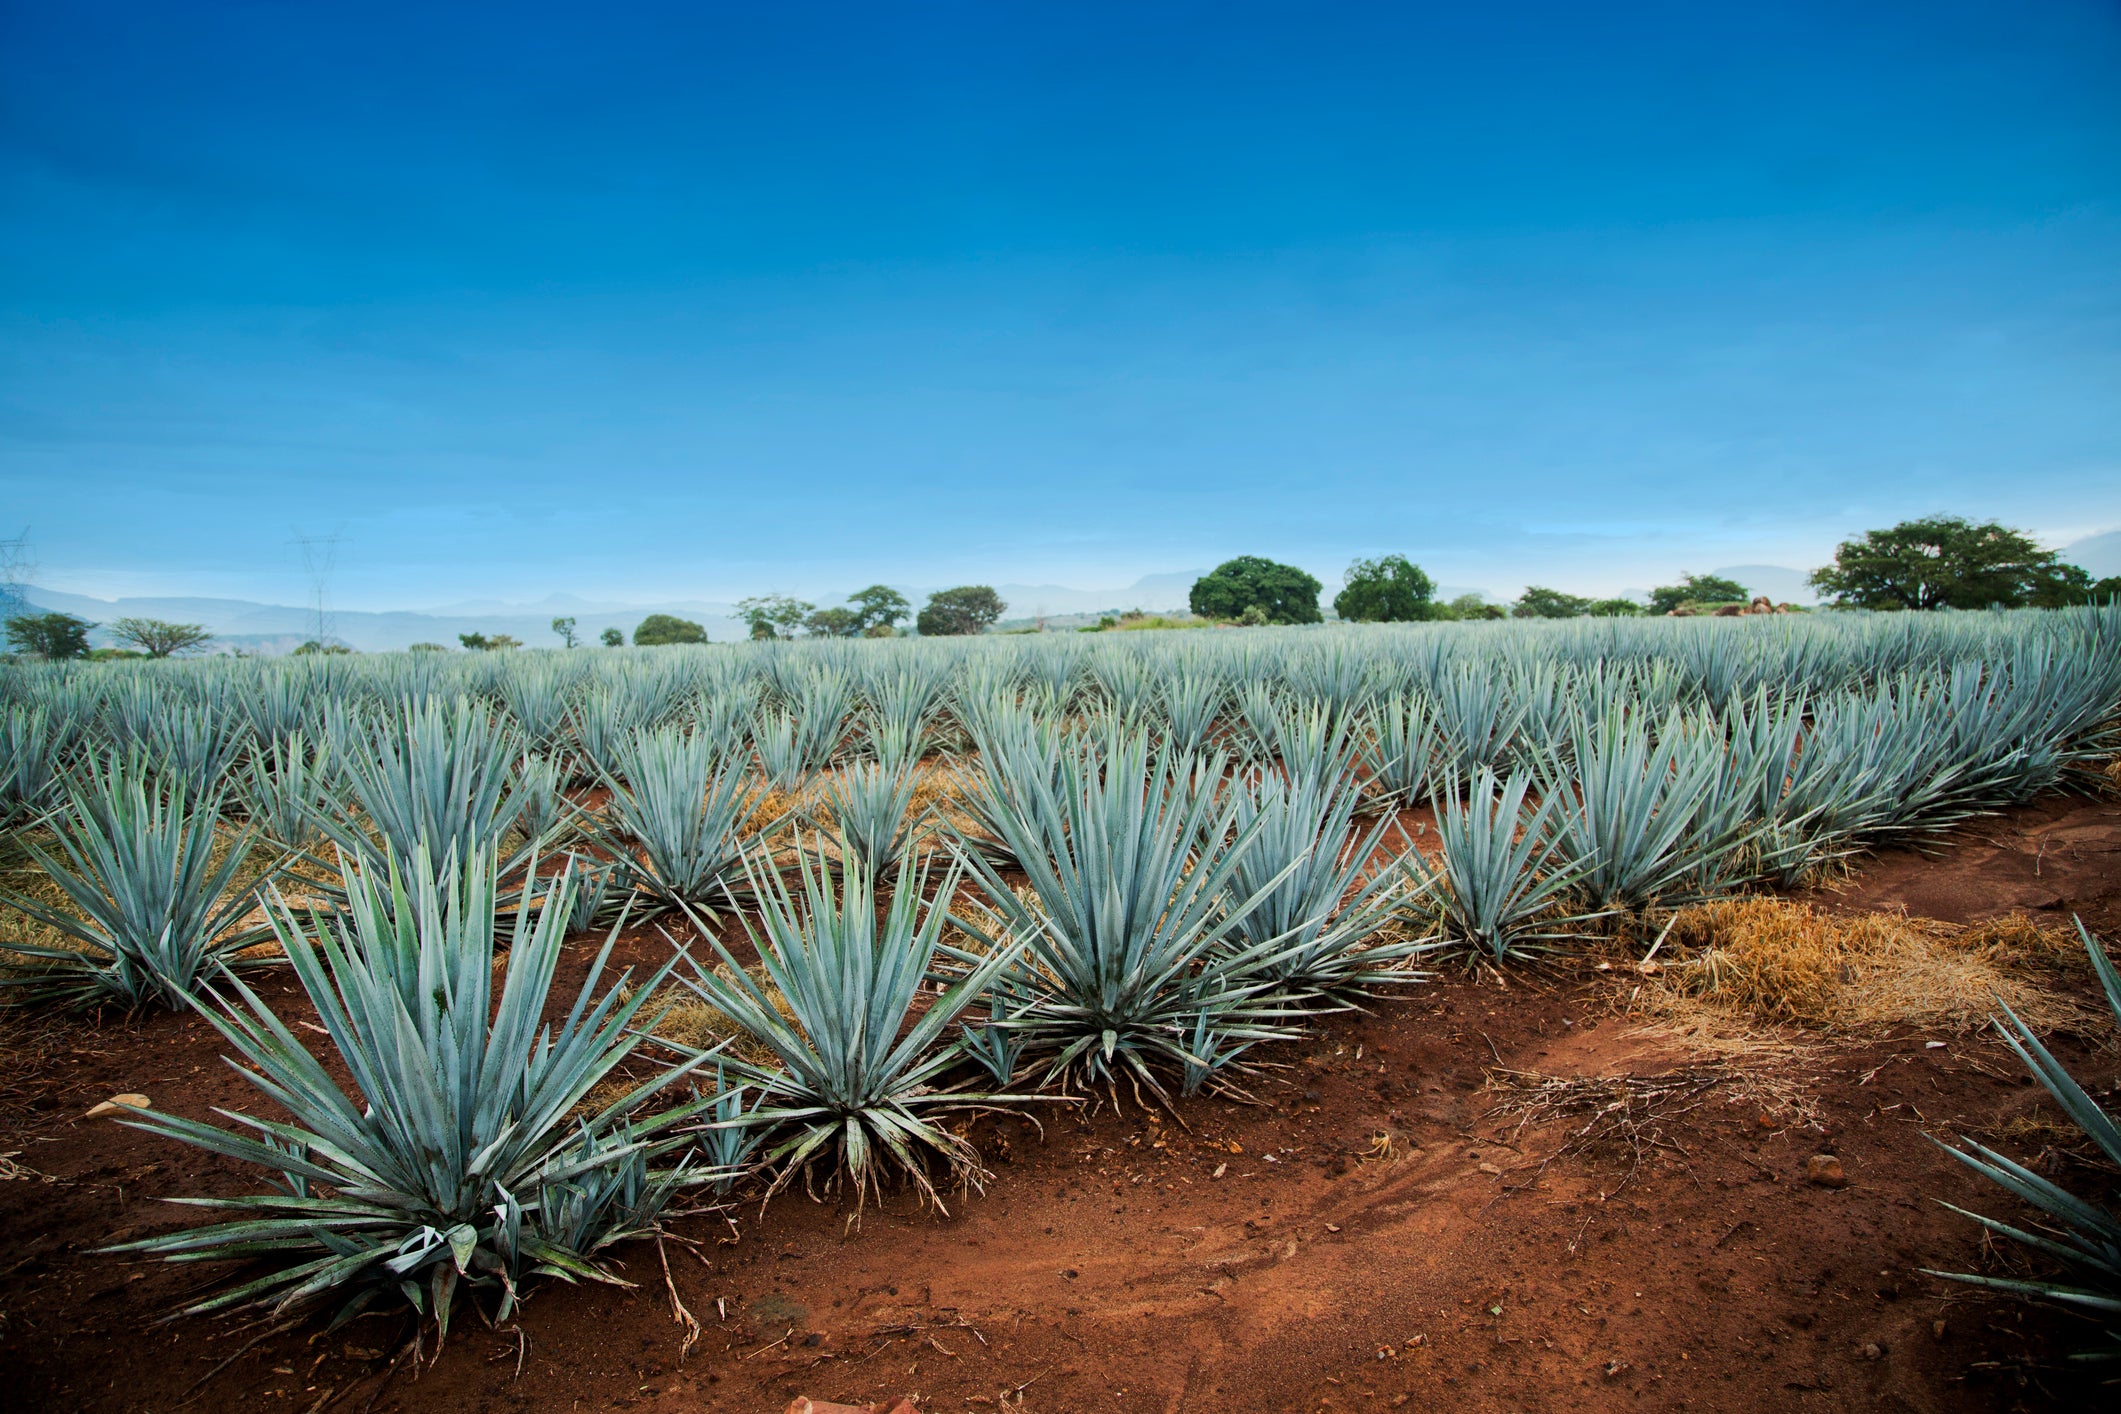 &#13;
Agave is best-known as the plant from which pulp is turned into tequila (Getty Images/iStockphoto)&#13;